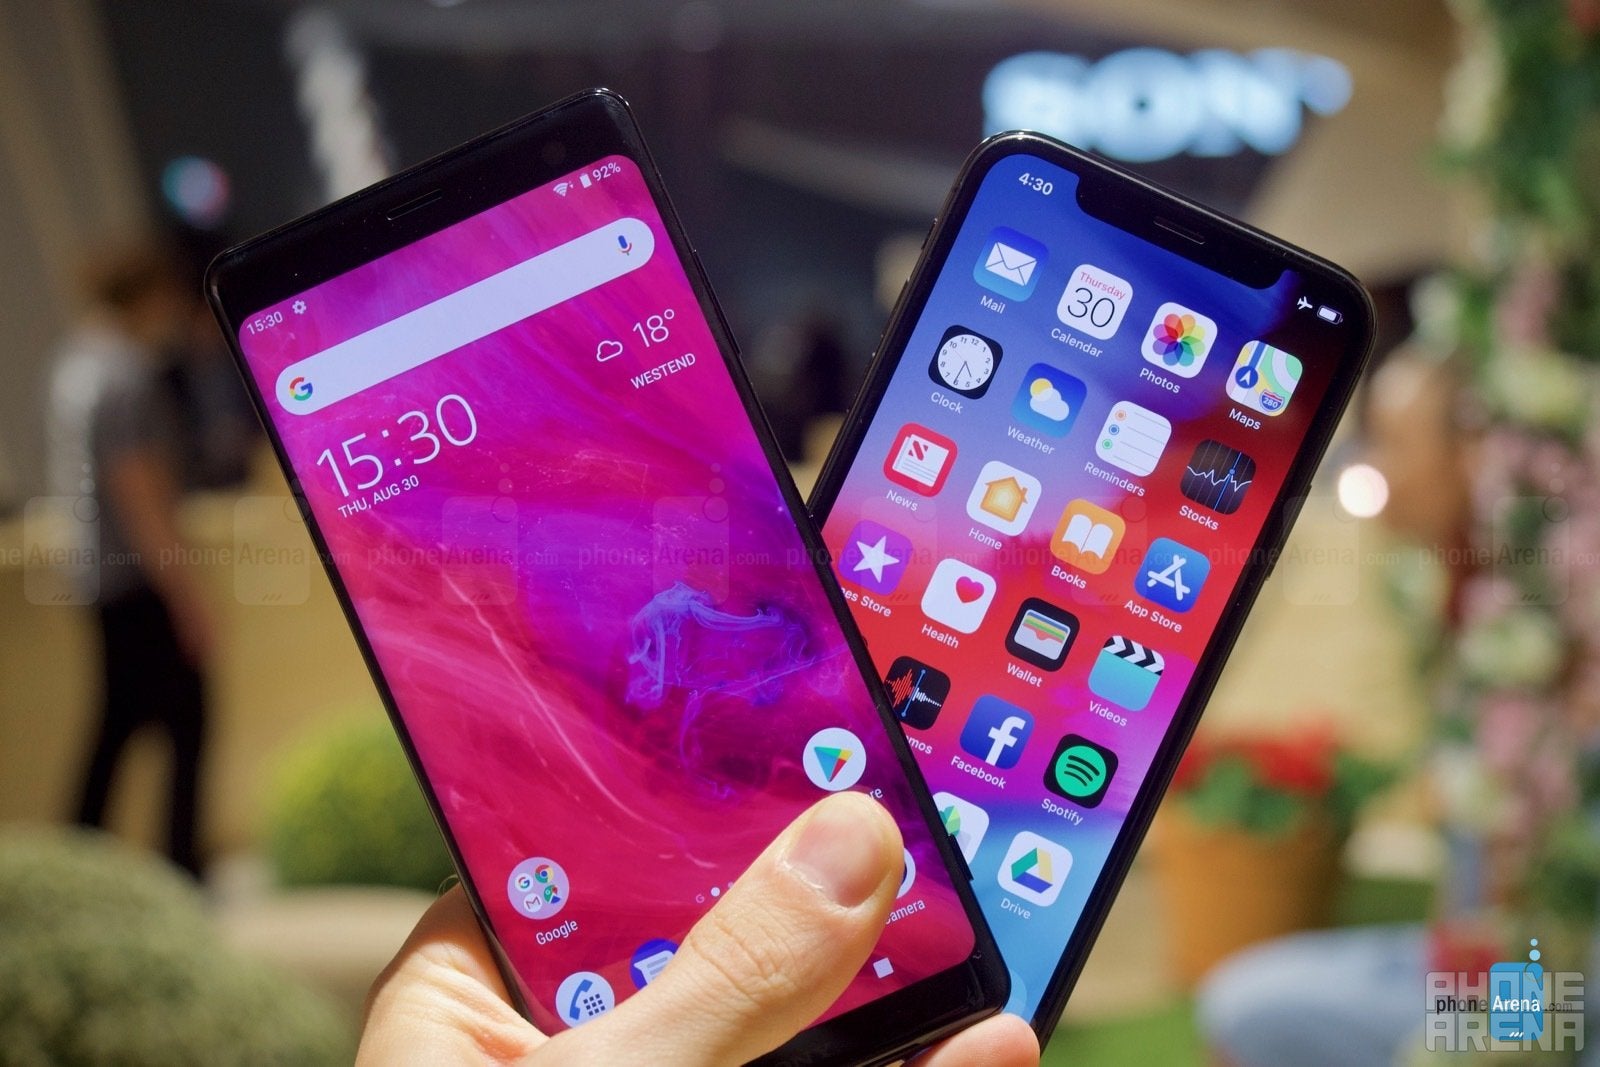 $900 Xperia XZ3 vs $1000 iPhone X: can you afford these babies?